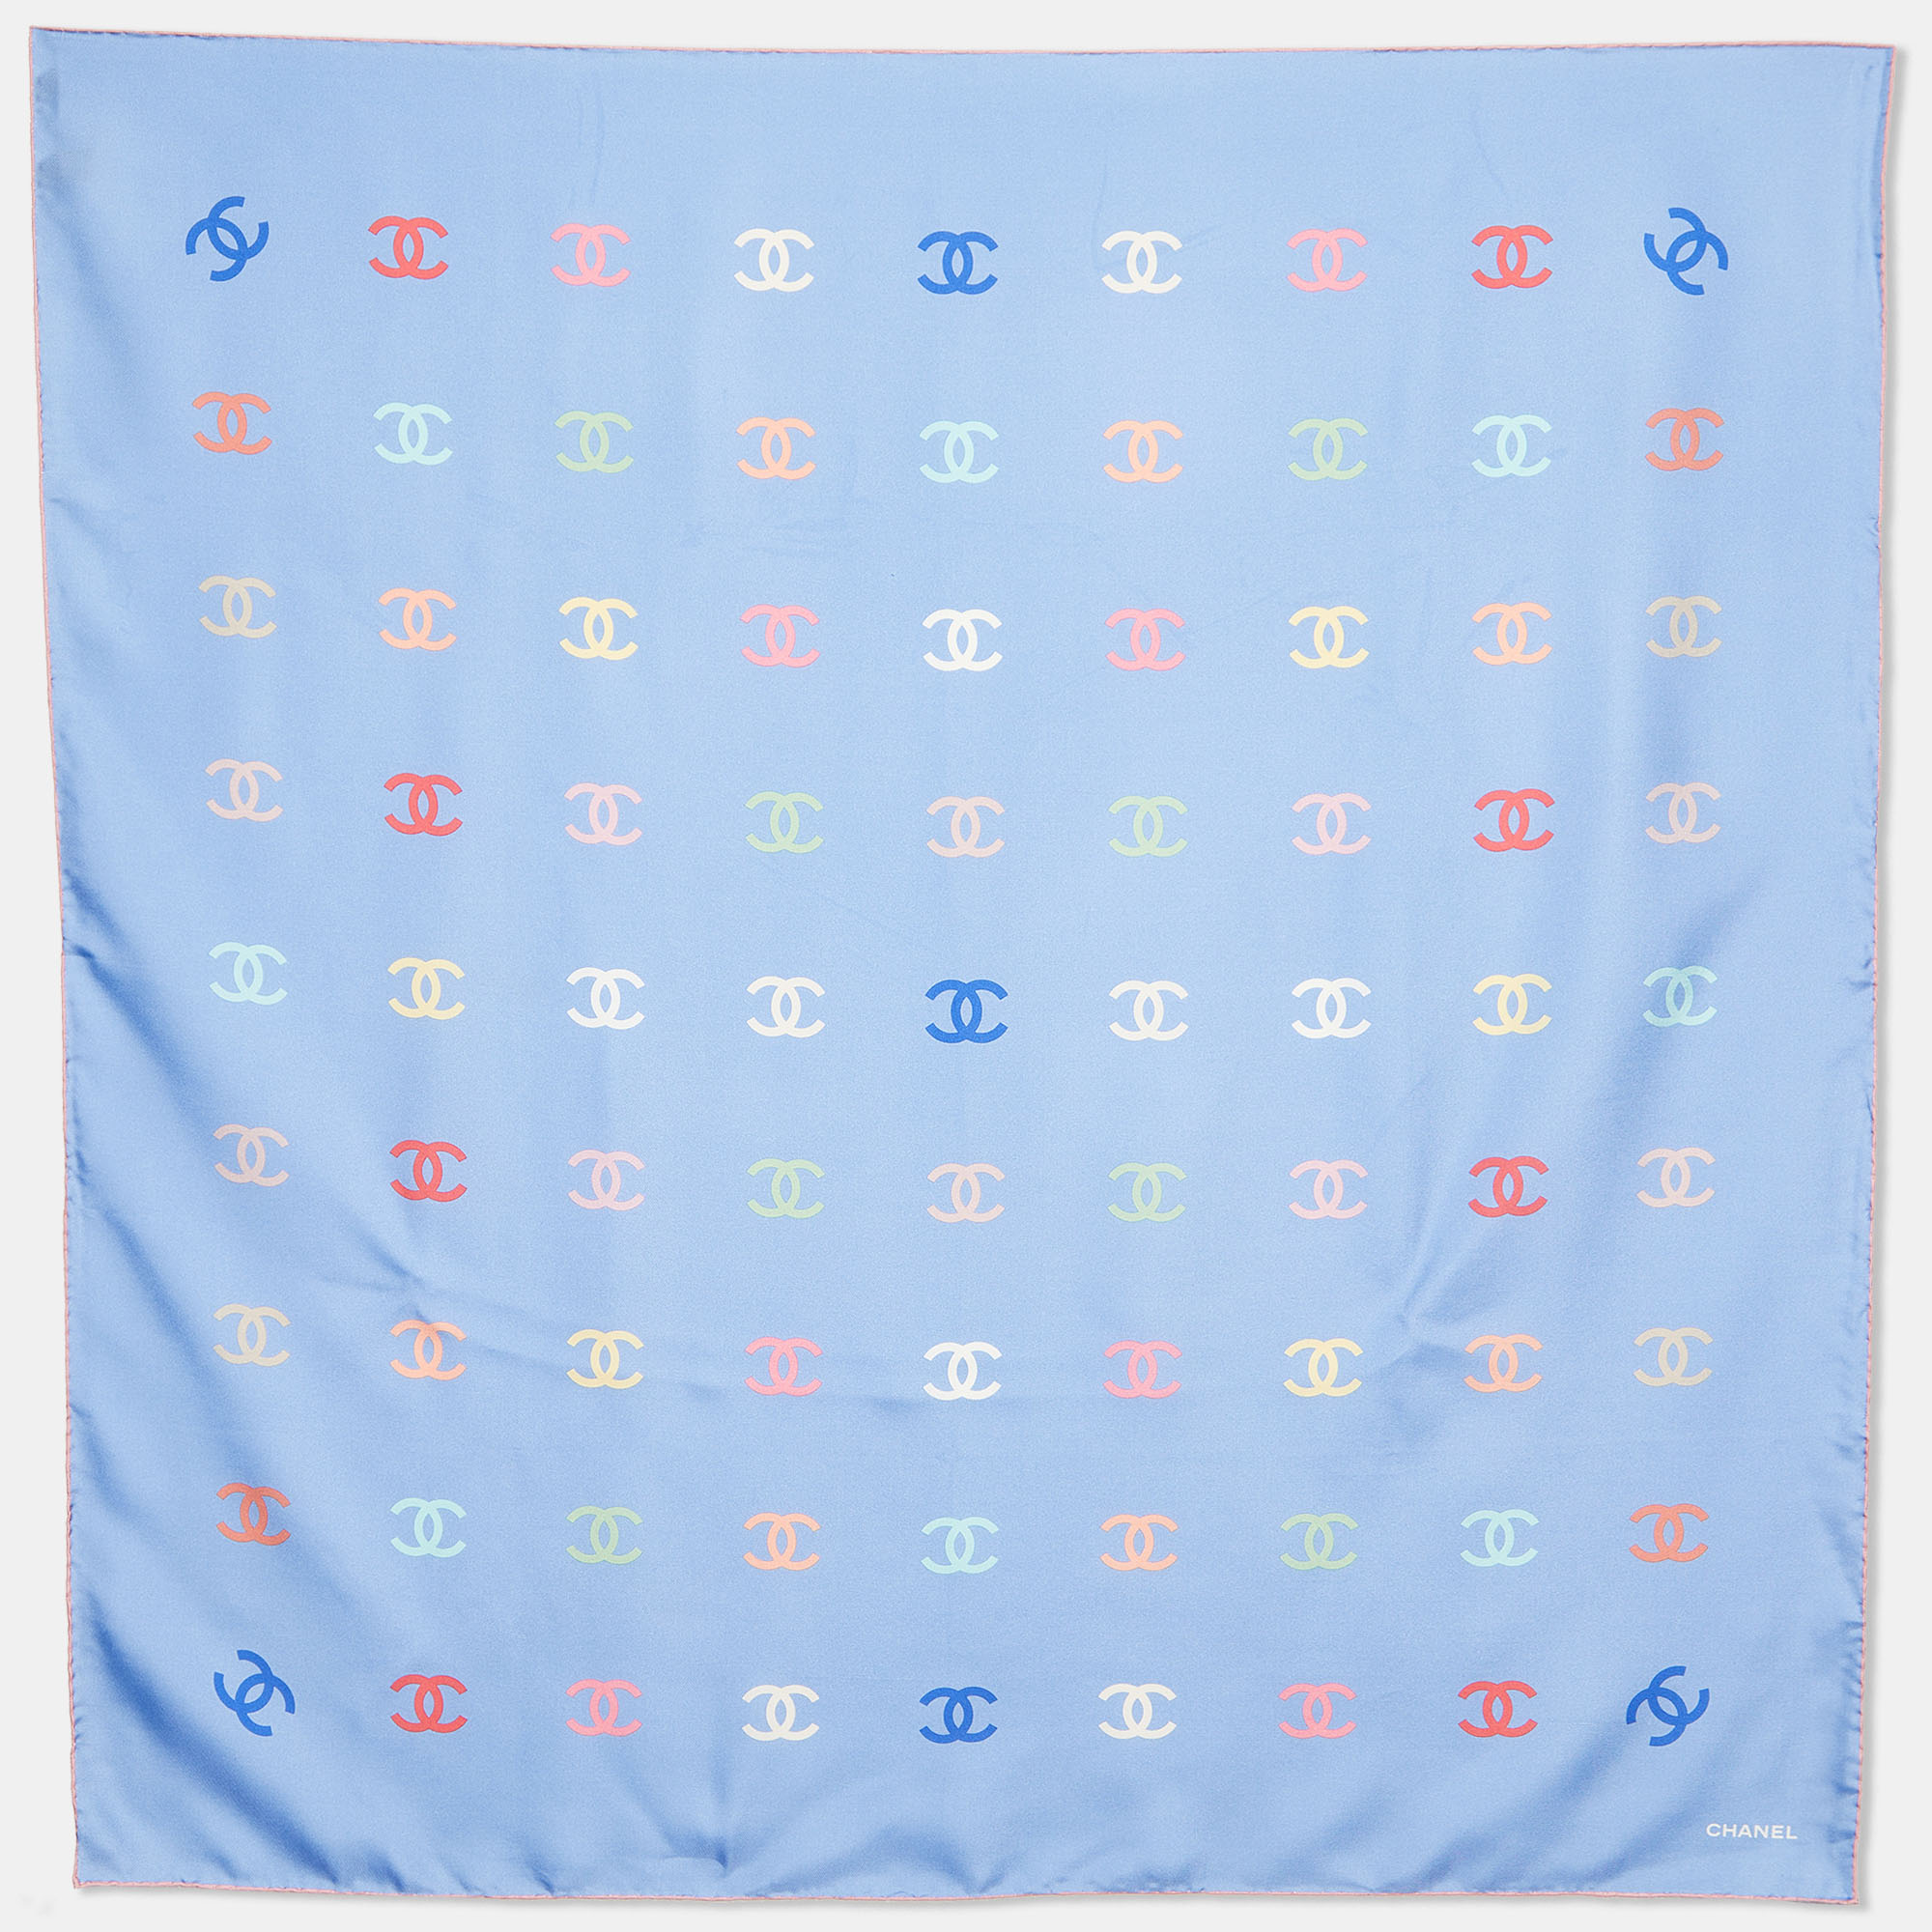 Chanel Light Blue All-over CC Print Silk Square Scarf